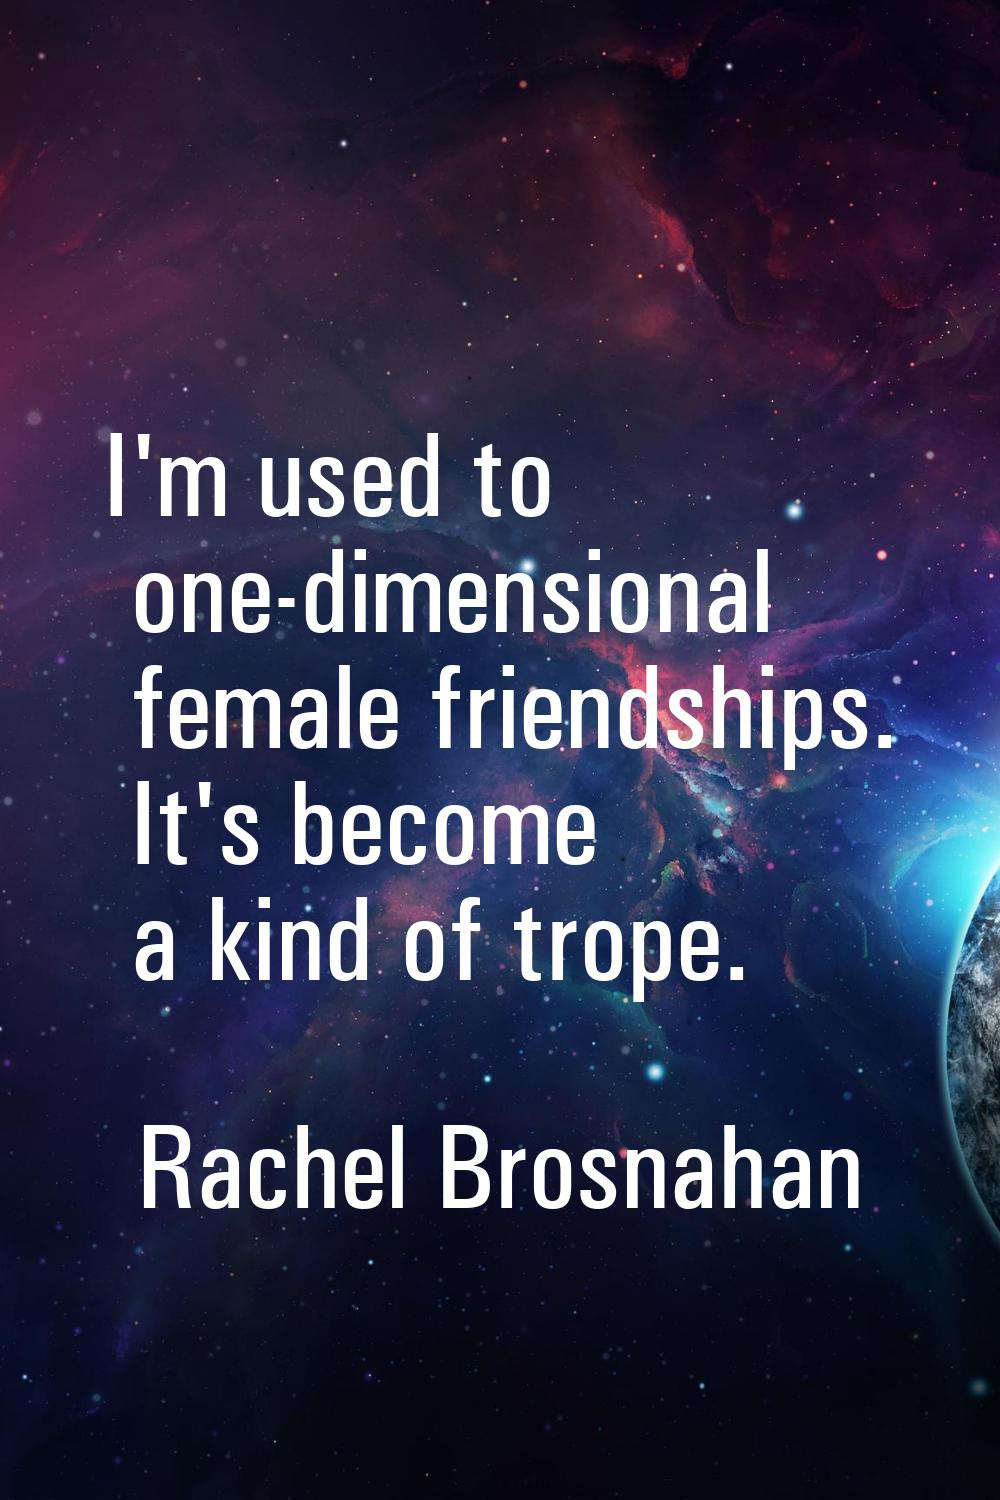 I'm used to one-dimensional female friendships. It's become a kind of trope.